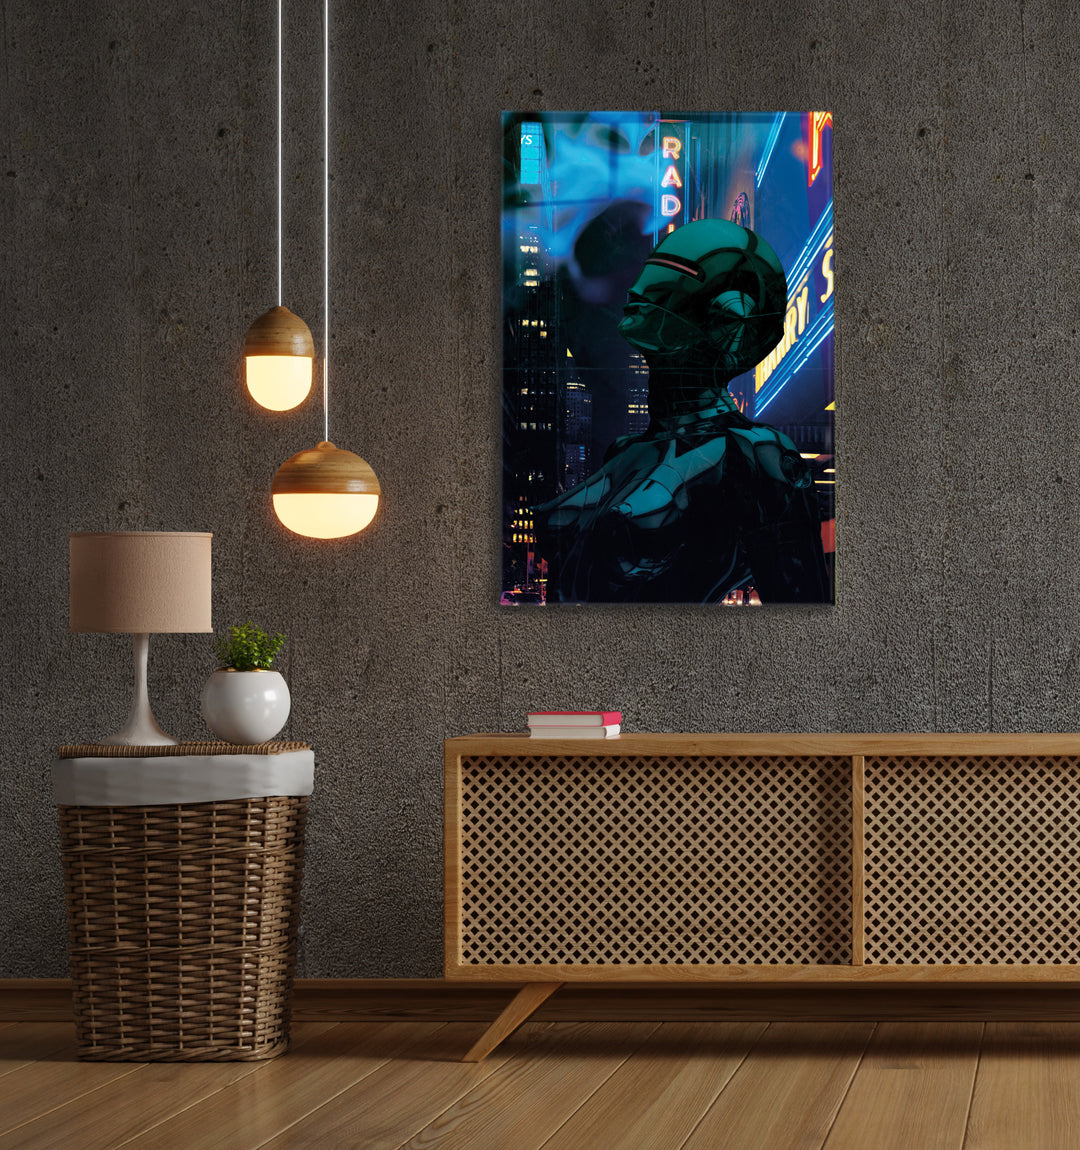 Acrylic Modern Wall Art Robotic City - Acrylic Wall Art - Picture Photo Printing Artwork - Multiple Size Options - egraphicstore